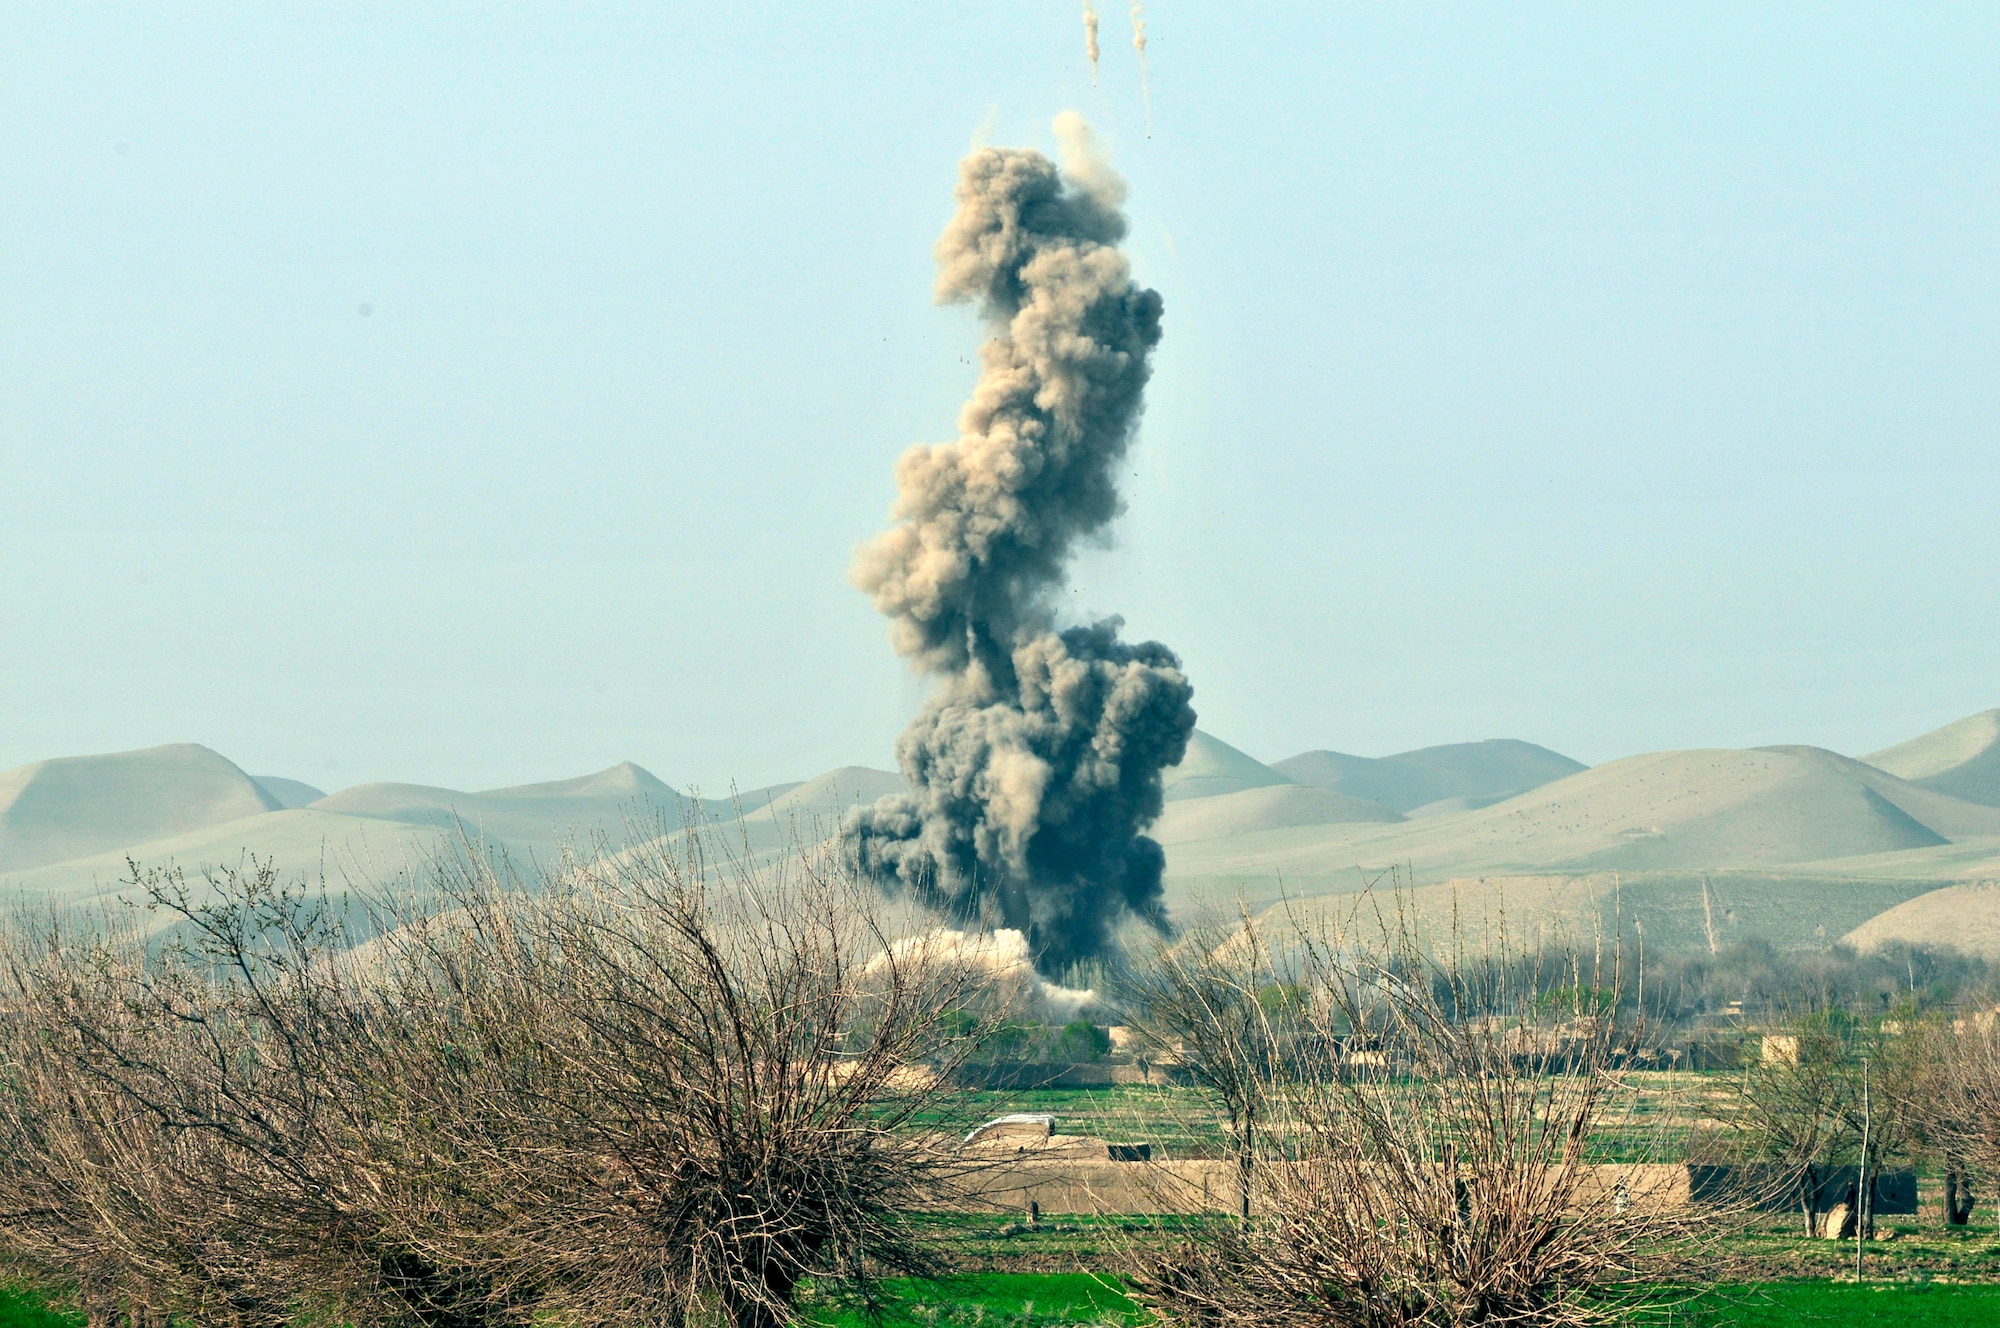 BALA MURGHAB, Afghanistan – An insurgent compound explodes after a Air Force B-1 Lancer drops a 38GBU bomb on the facility in northern Bala Murghab Valley, Badghis Province, Afghanistan April 4, 2011. The B-1 responded as a close-air support asset and assisted 7th Squadron, 10th Cavalry Regiment scouts from Bulldog Troop’s Red Platoon in a sustained combat engagement, which resulted in the destruction of insurgent strongholds and improvised explosive device making facilities. This photo was originally released April 7, 2011. (U.S. Air Force photo/Master Sgt. Kevin Wallace)